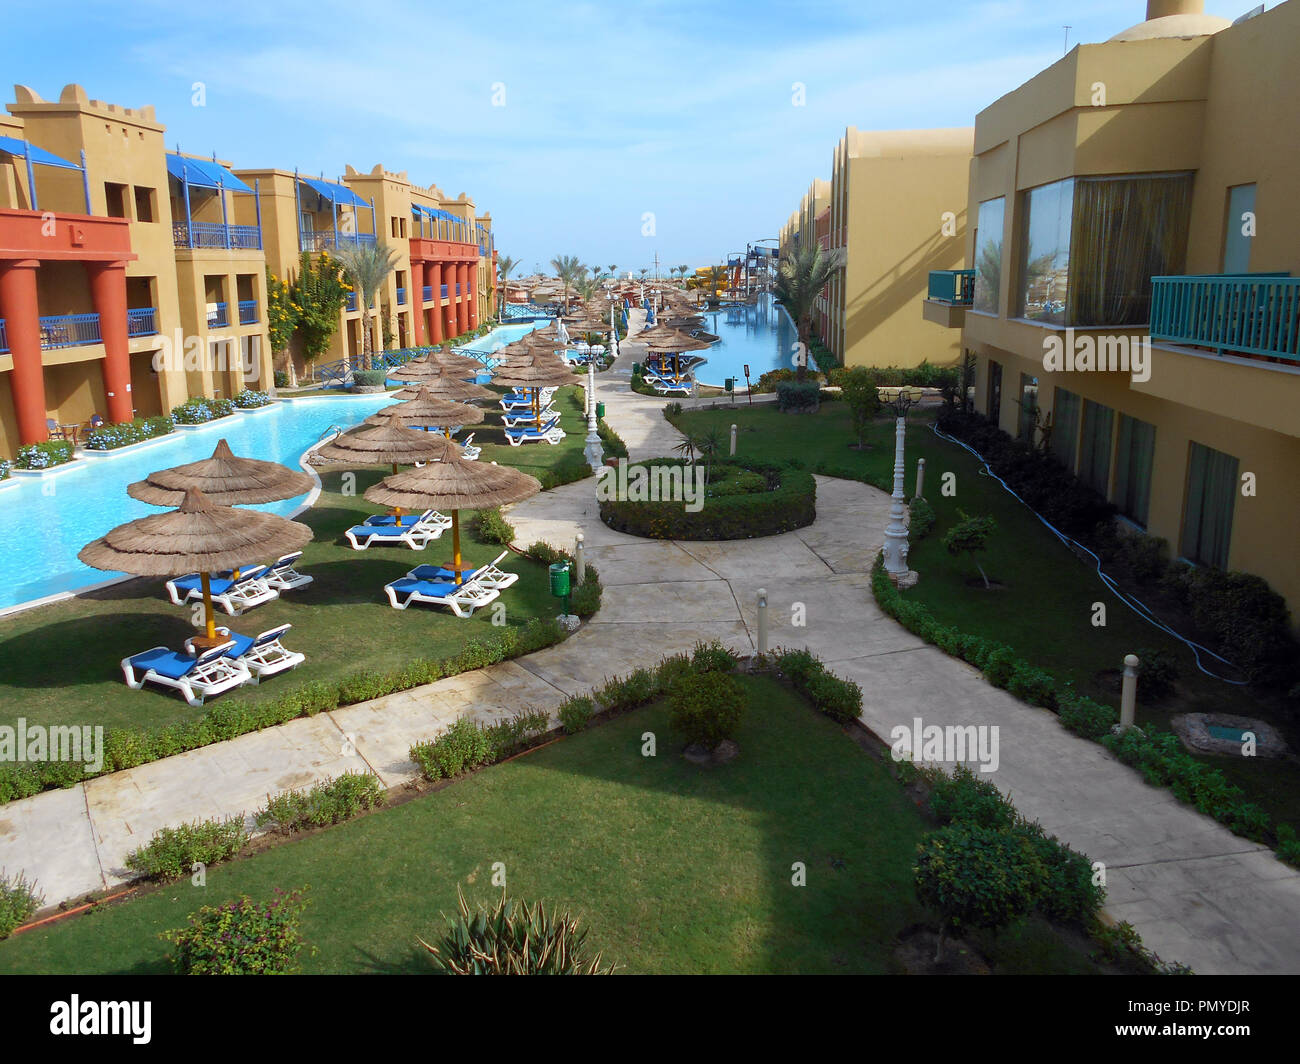 The low level apartments and swimming facilities at one of the many hotels at the Red Sea holiday of Hurghada in Egypt. Stock Photo